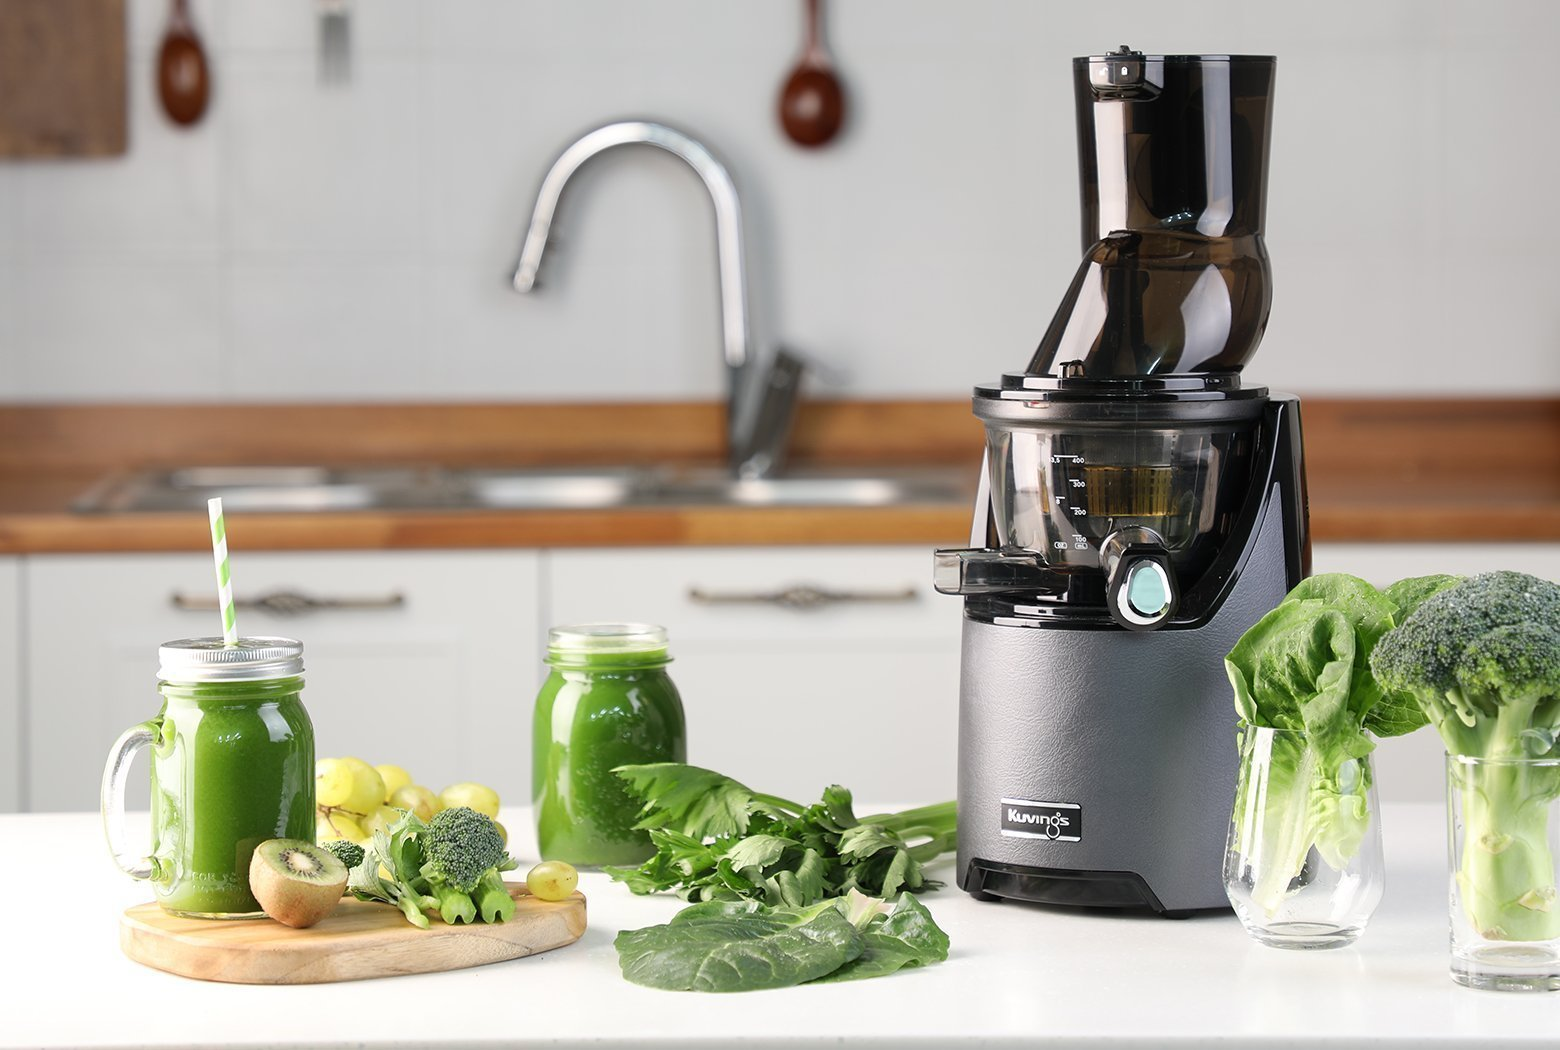 Kuvings juicers and blenders 20% off site wide + free shipping